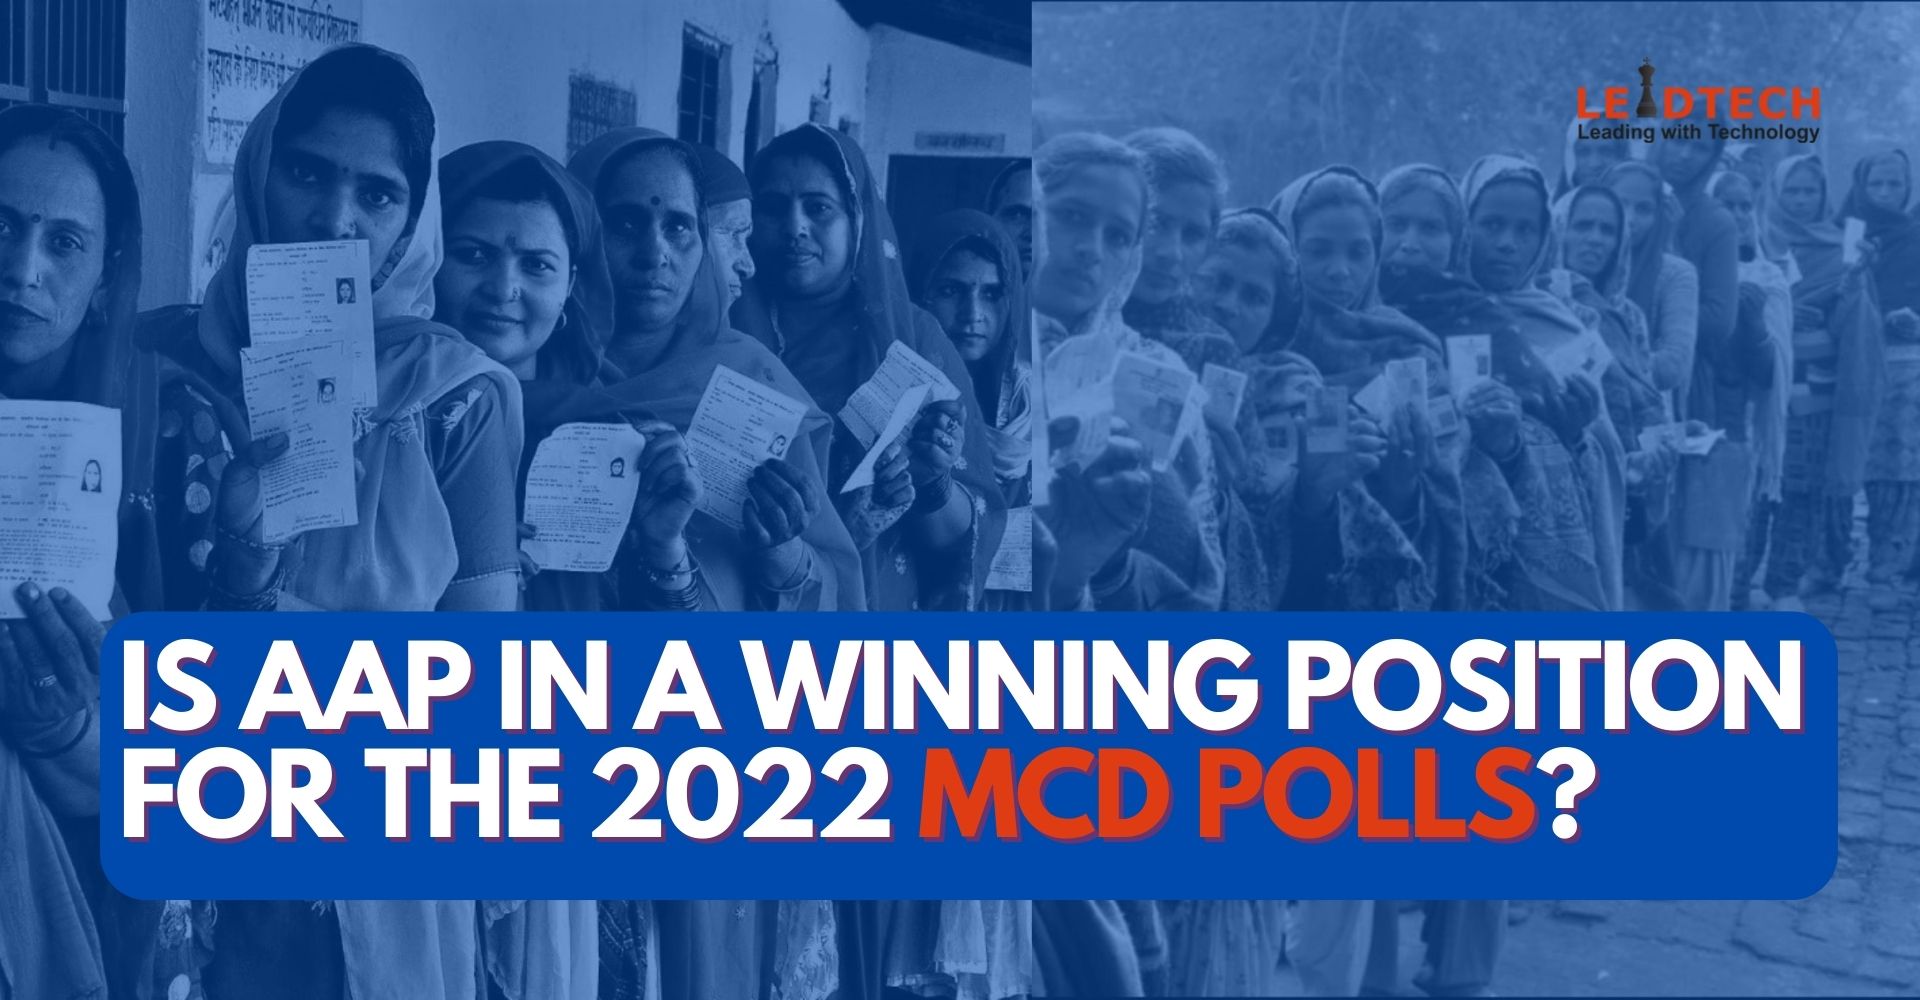 IS AAP IN A WINNING POSITION FOR THE 2022 MCD POLLS